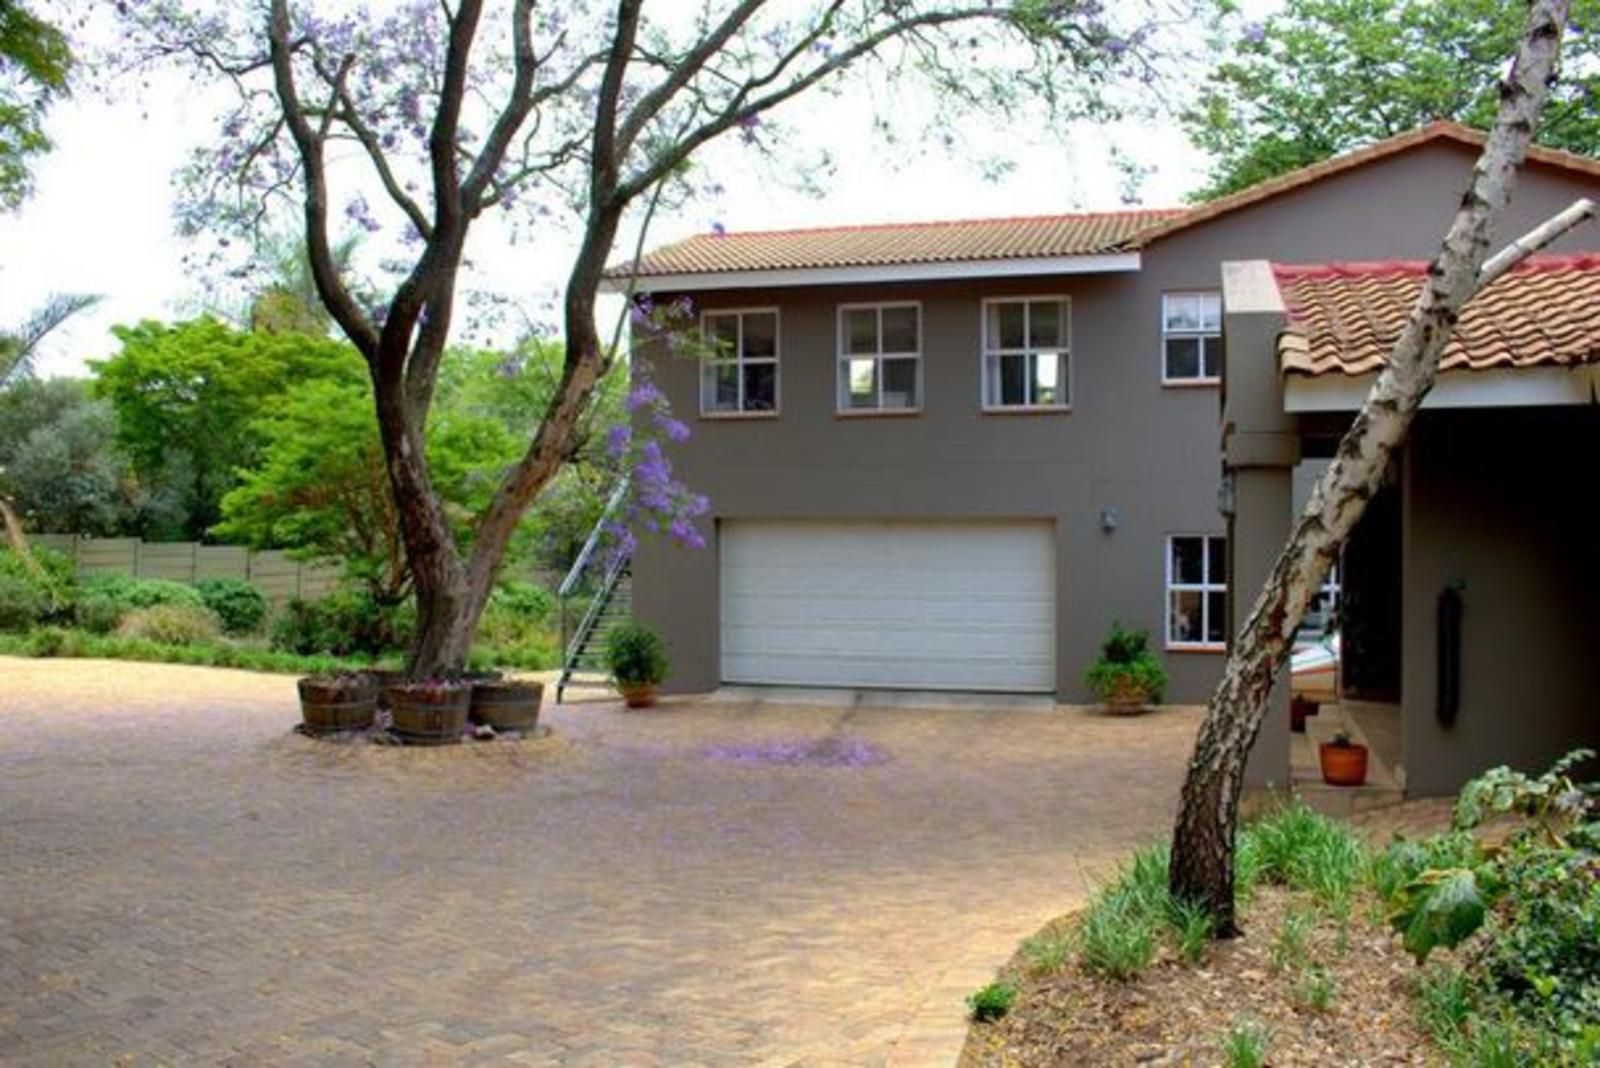 Wild Olive Executive Suites Craighall Johannesburg Gauteng South Africa House, Building, Architecture